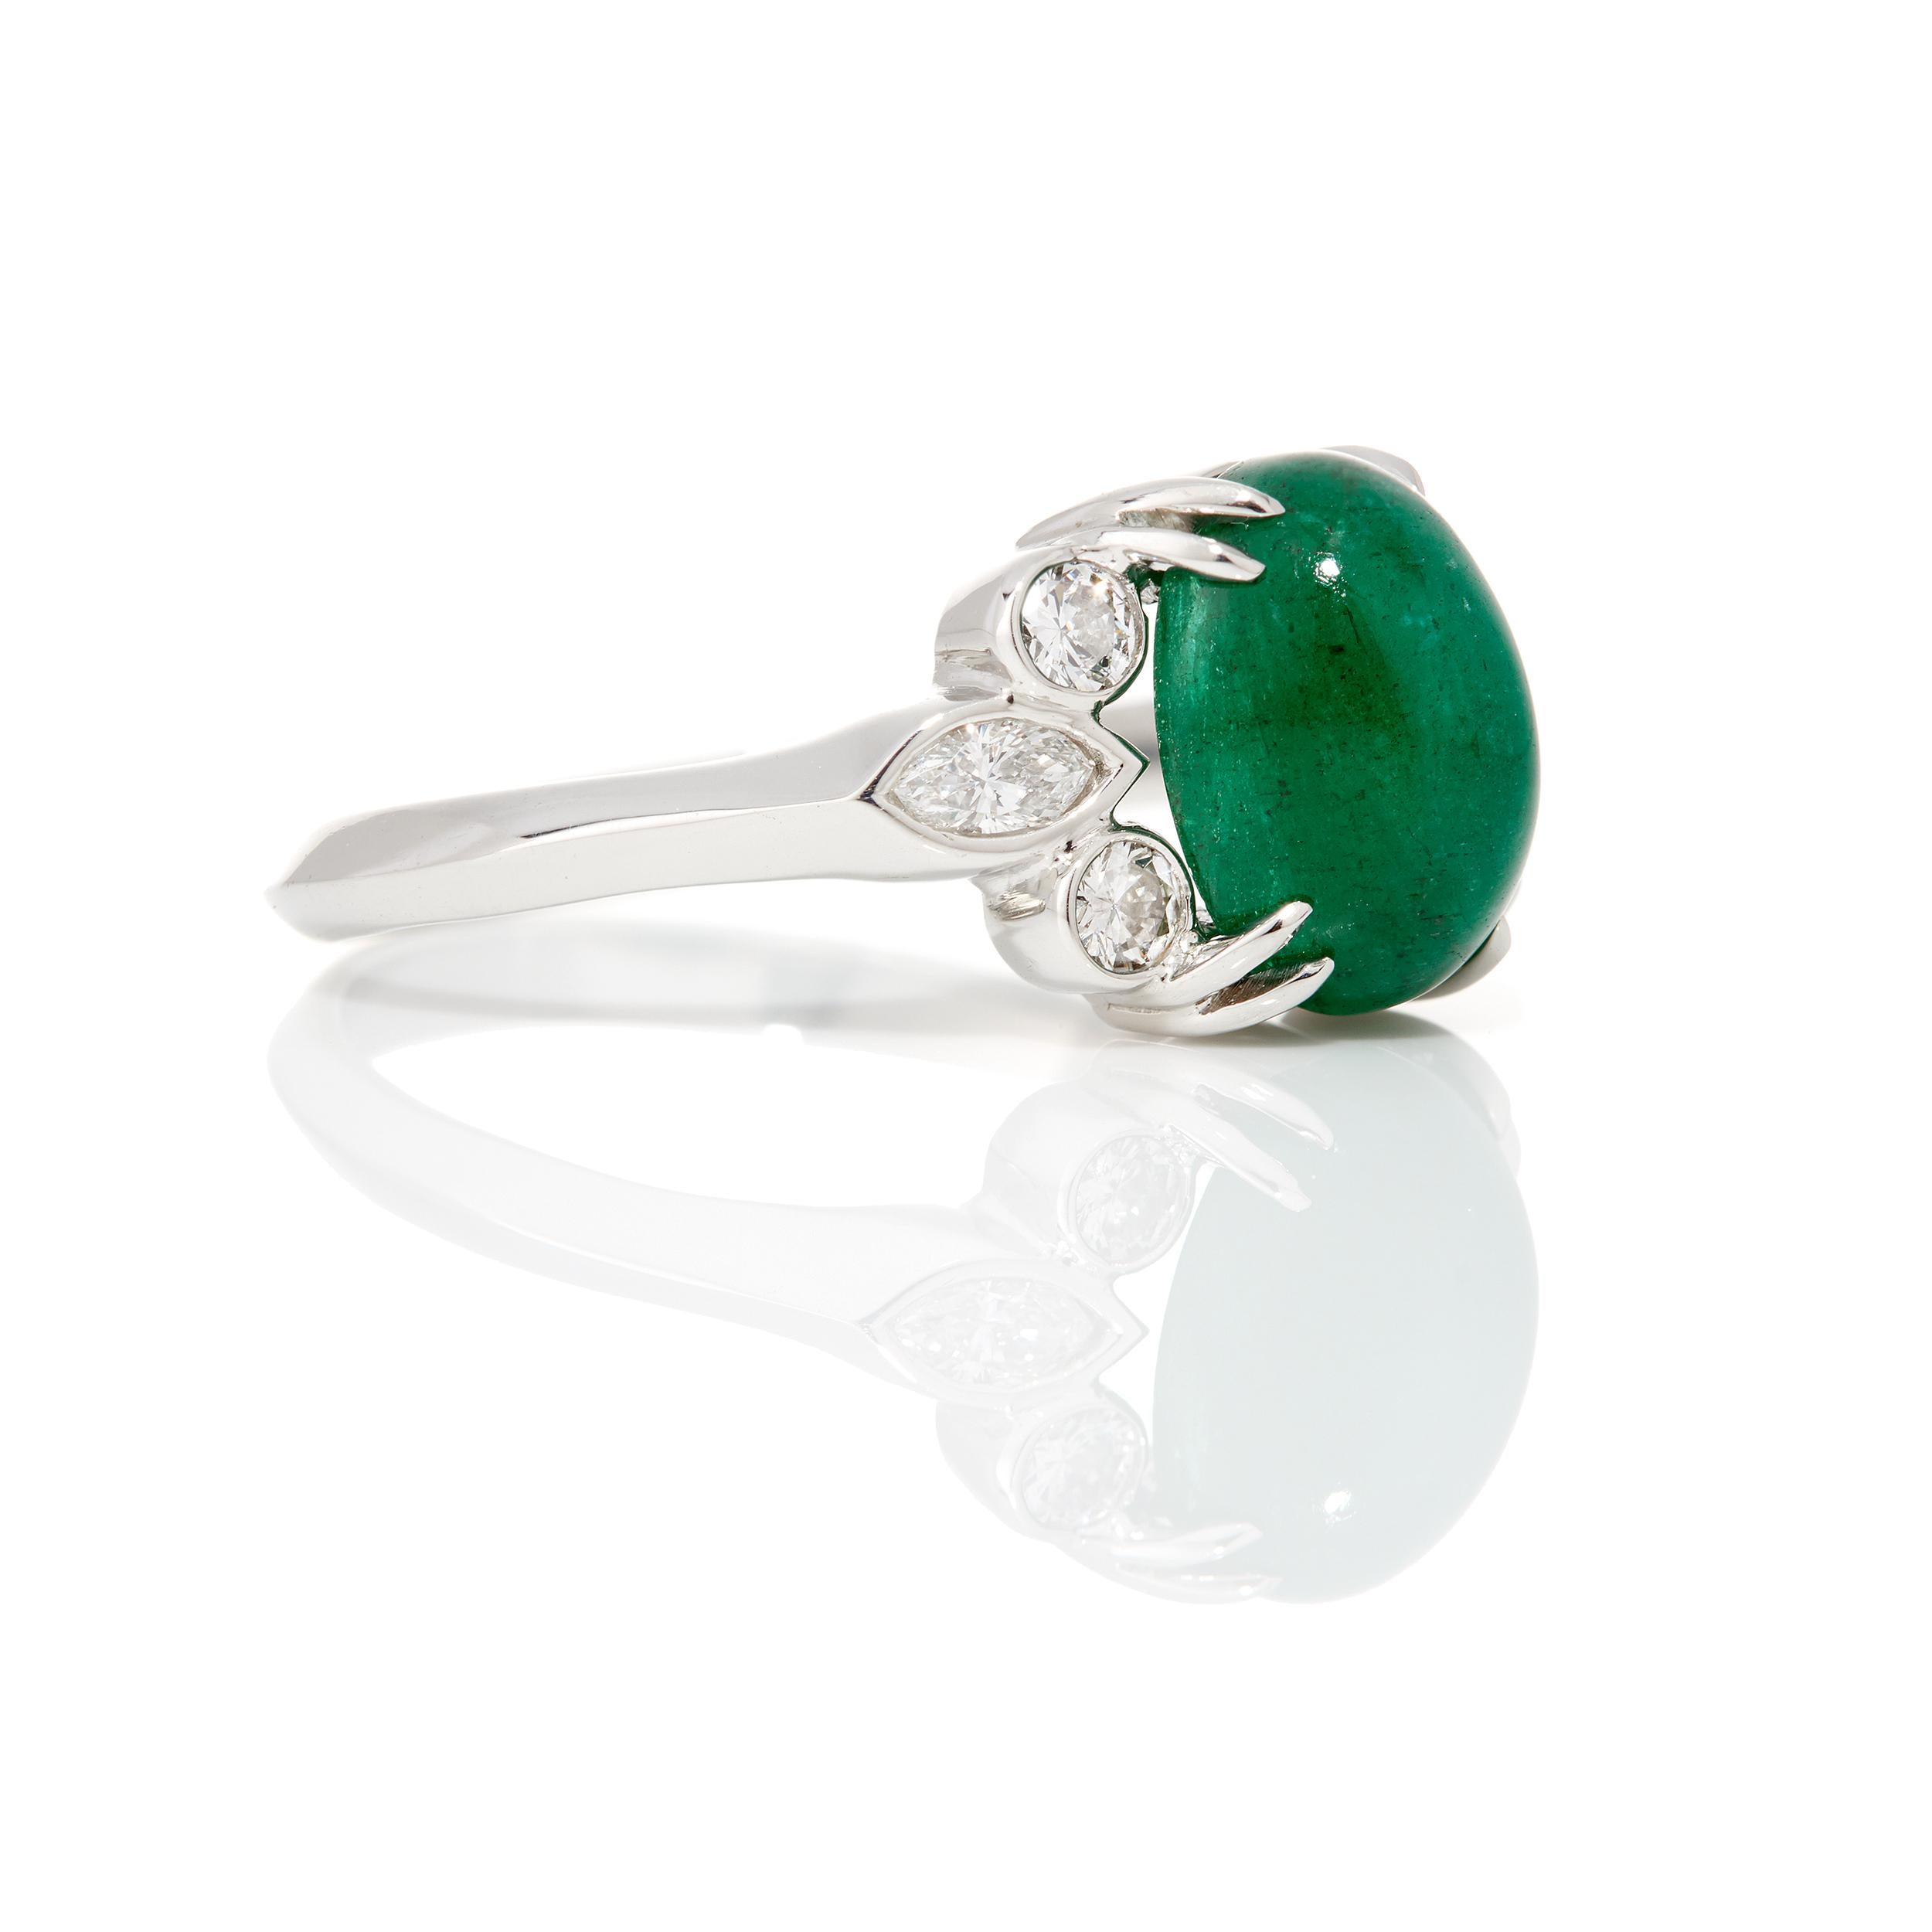 This set of smooth Cabochon Zambian Emeralds accented by diamonds is classic. Suitable for any occasion!

Ring size 6.5
*Can be sized upon request*

Oval-shaped Emerald Cabochon 2.69 Carats
Diamonds 0.6 Carats
Set in Platinum 950
Total Gem Weight